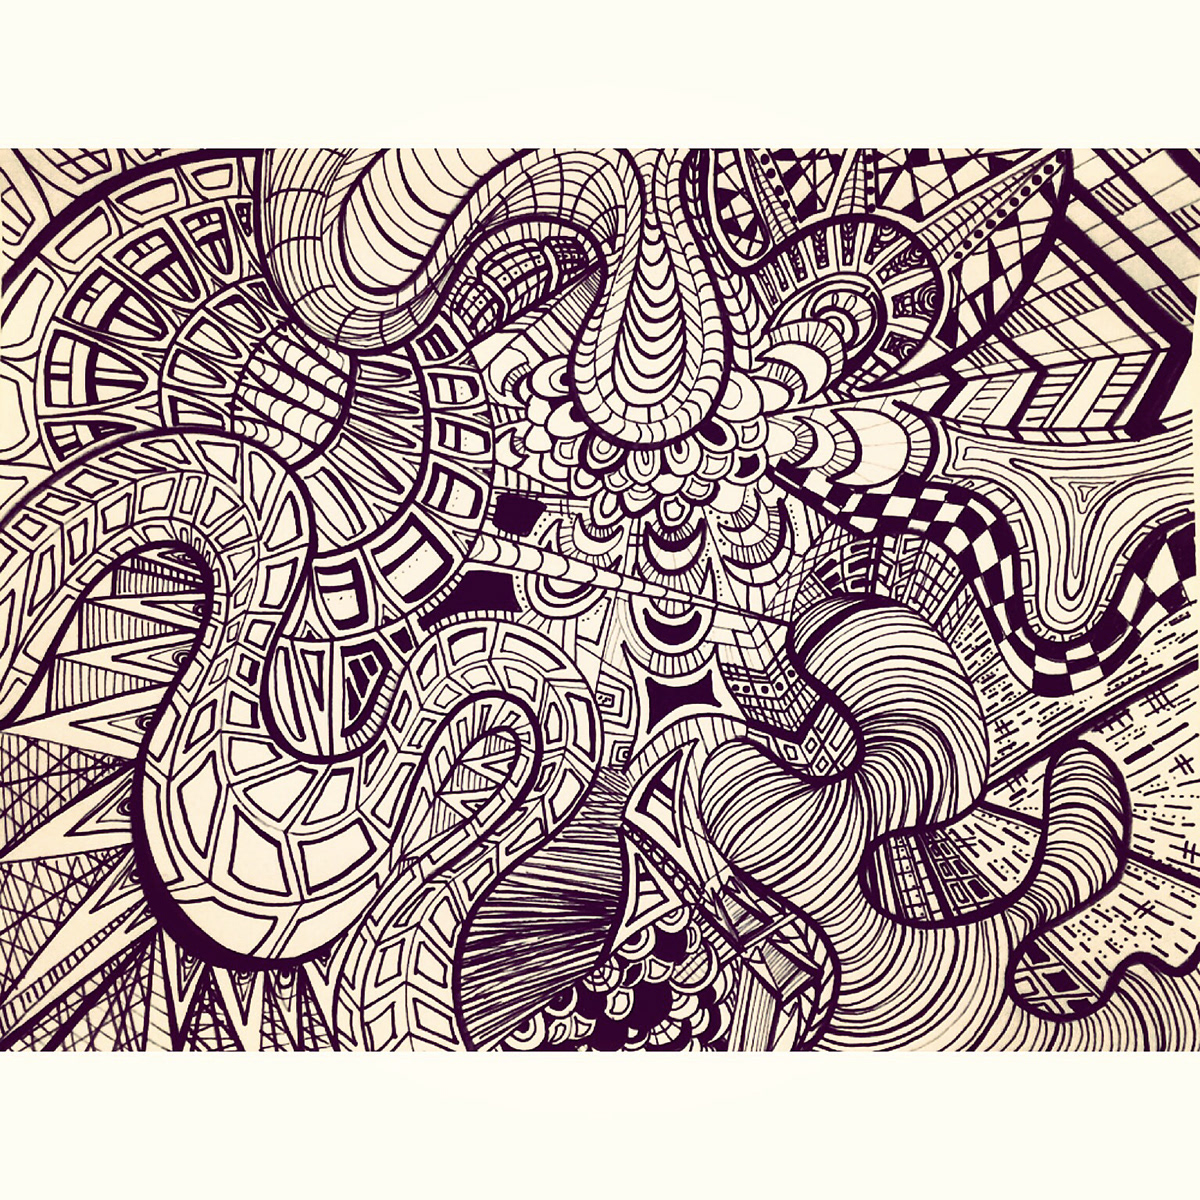 art sketching doodle abstract Abstract Art artistic creative design abstract drawing pattern Patterns abstract drawings designs street arts Street